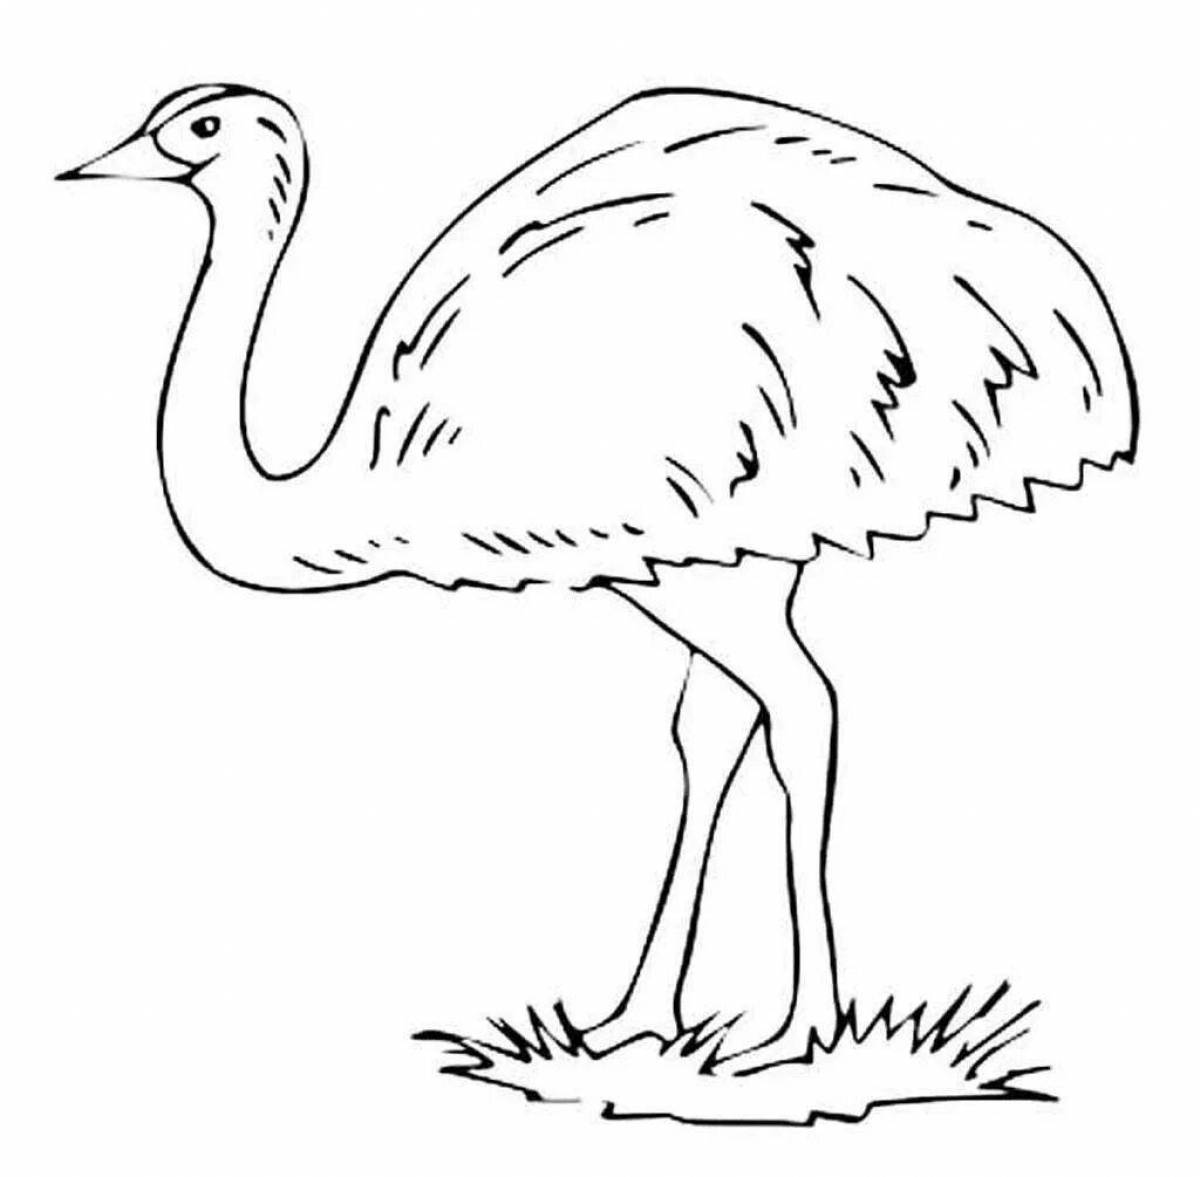 Colorful emu coloring book for kids